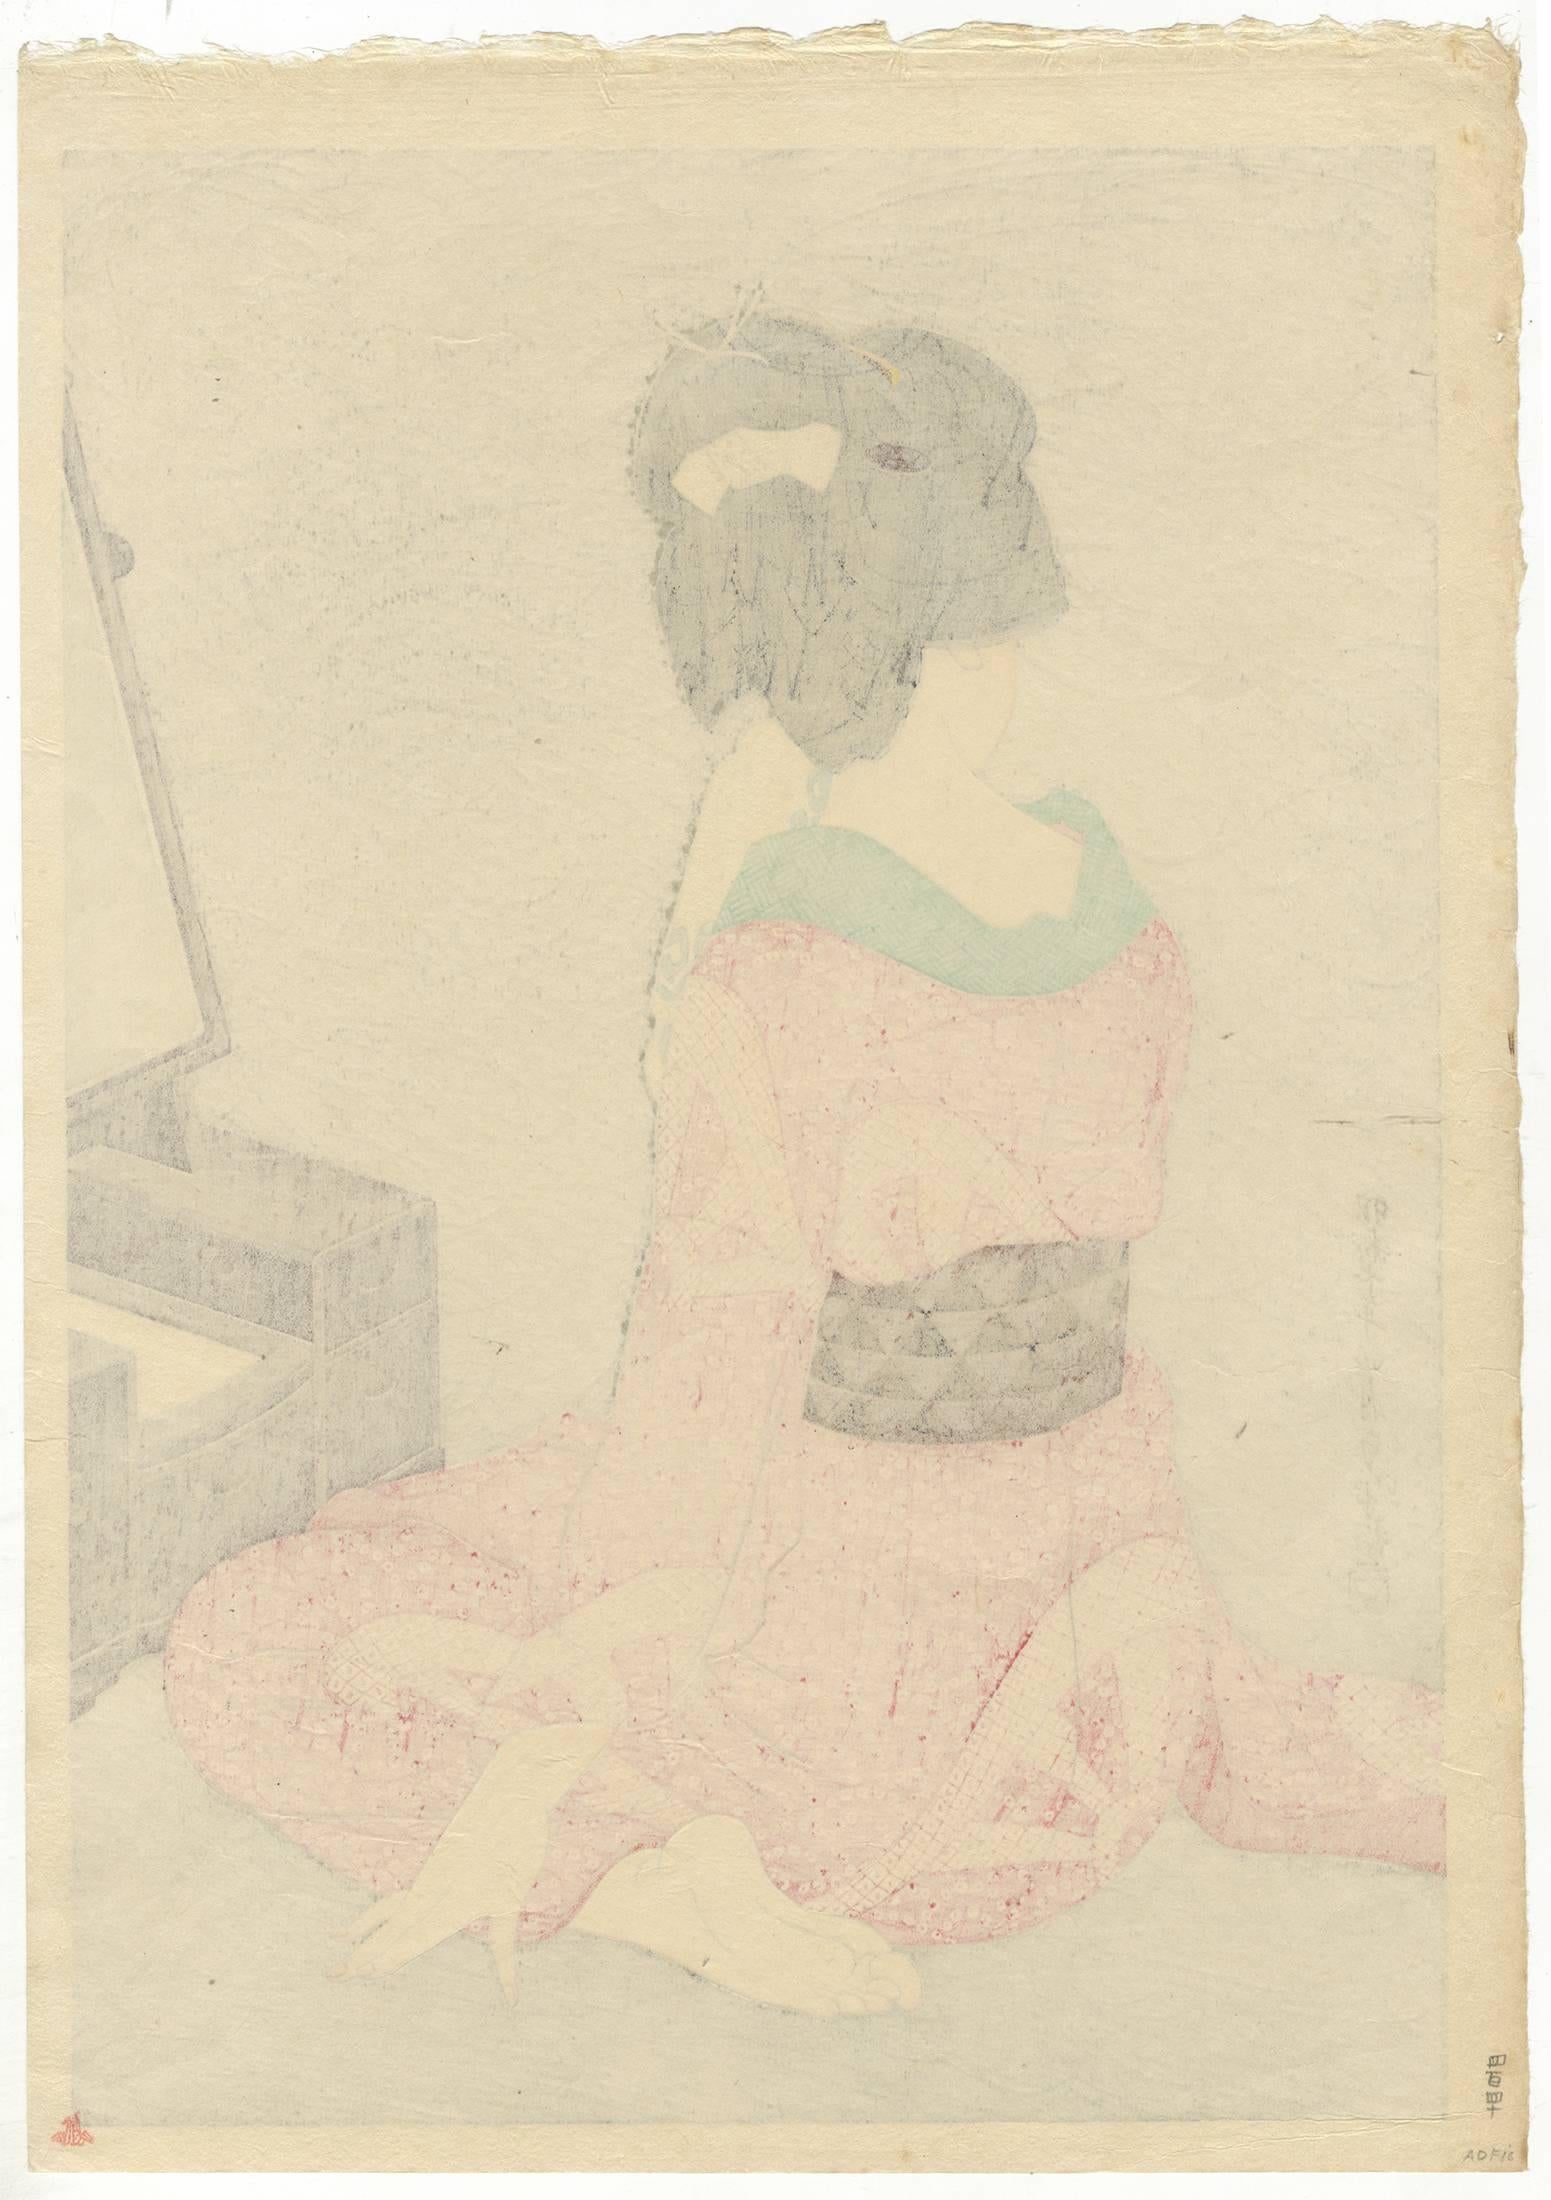 Artist: Hirano Hakuho
Title: Beauty and mirror
Publisher: Watanabe Shozaburo
Published: 1932

Although Hirano Hakuho is considered to have excelled in the portrayal of beautiful women, only six of his bijin-ga (beautiful women prints) are known